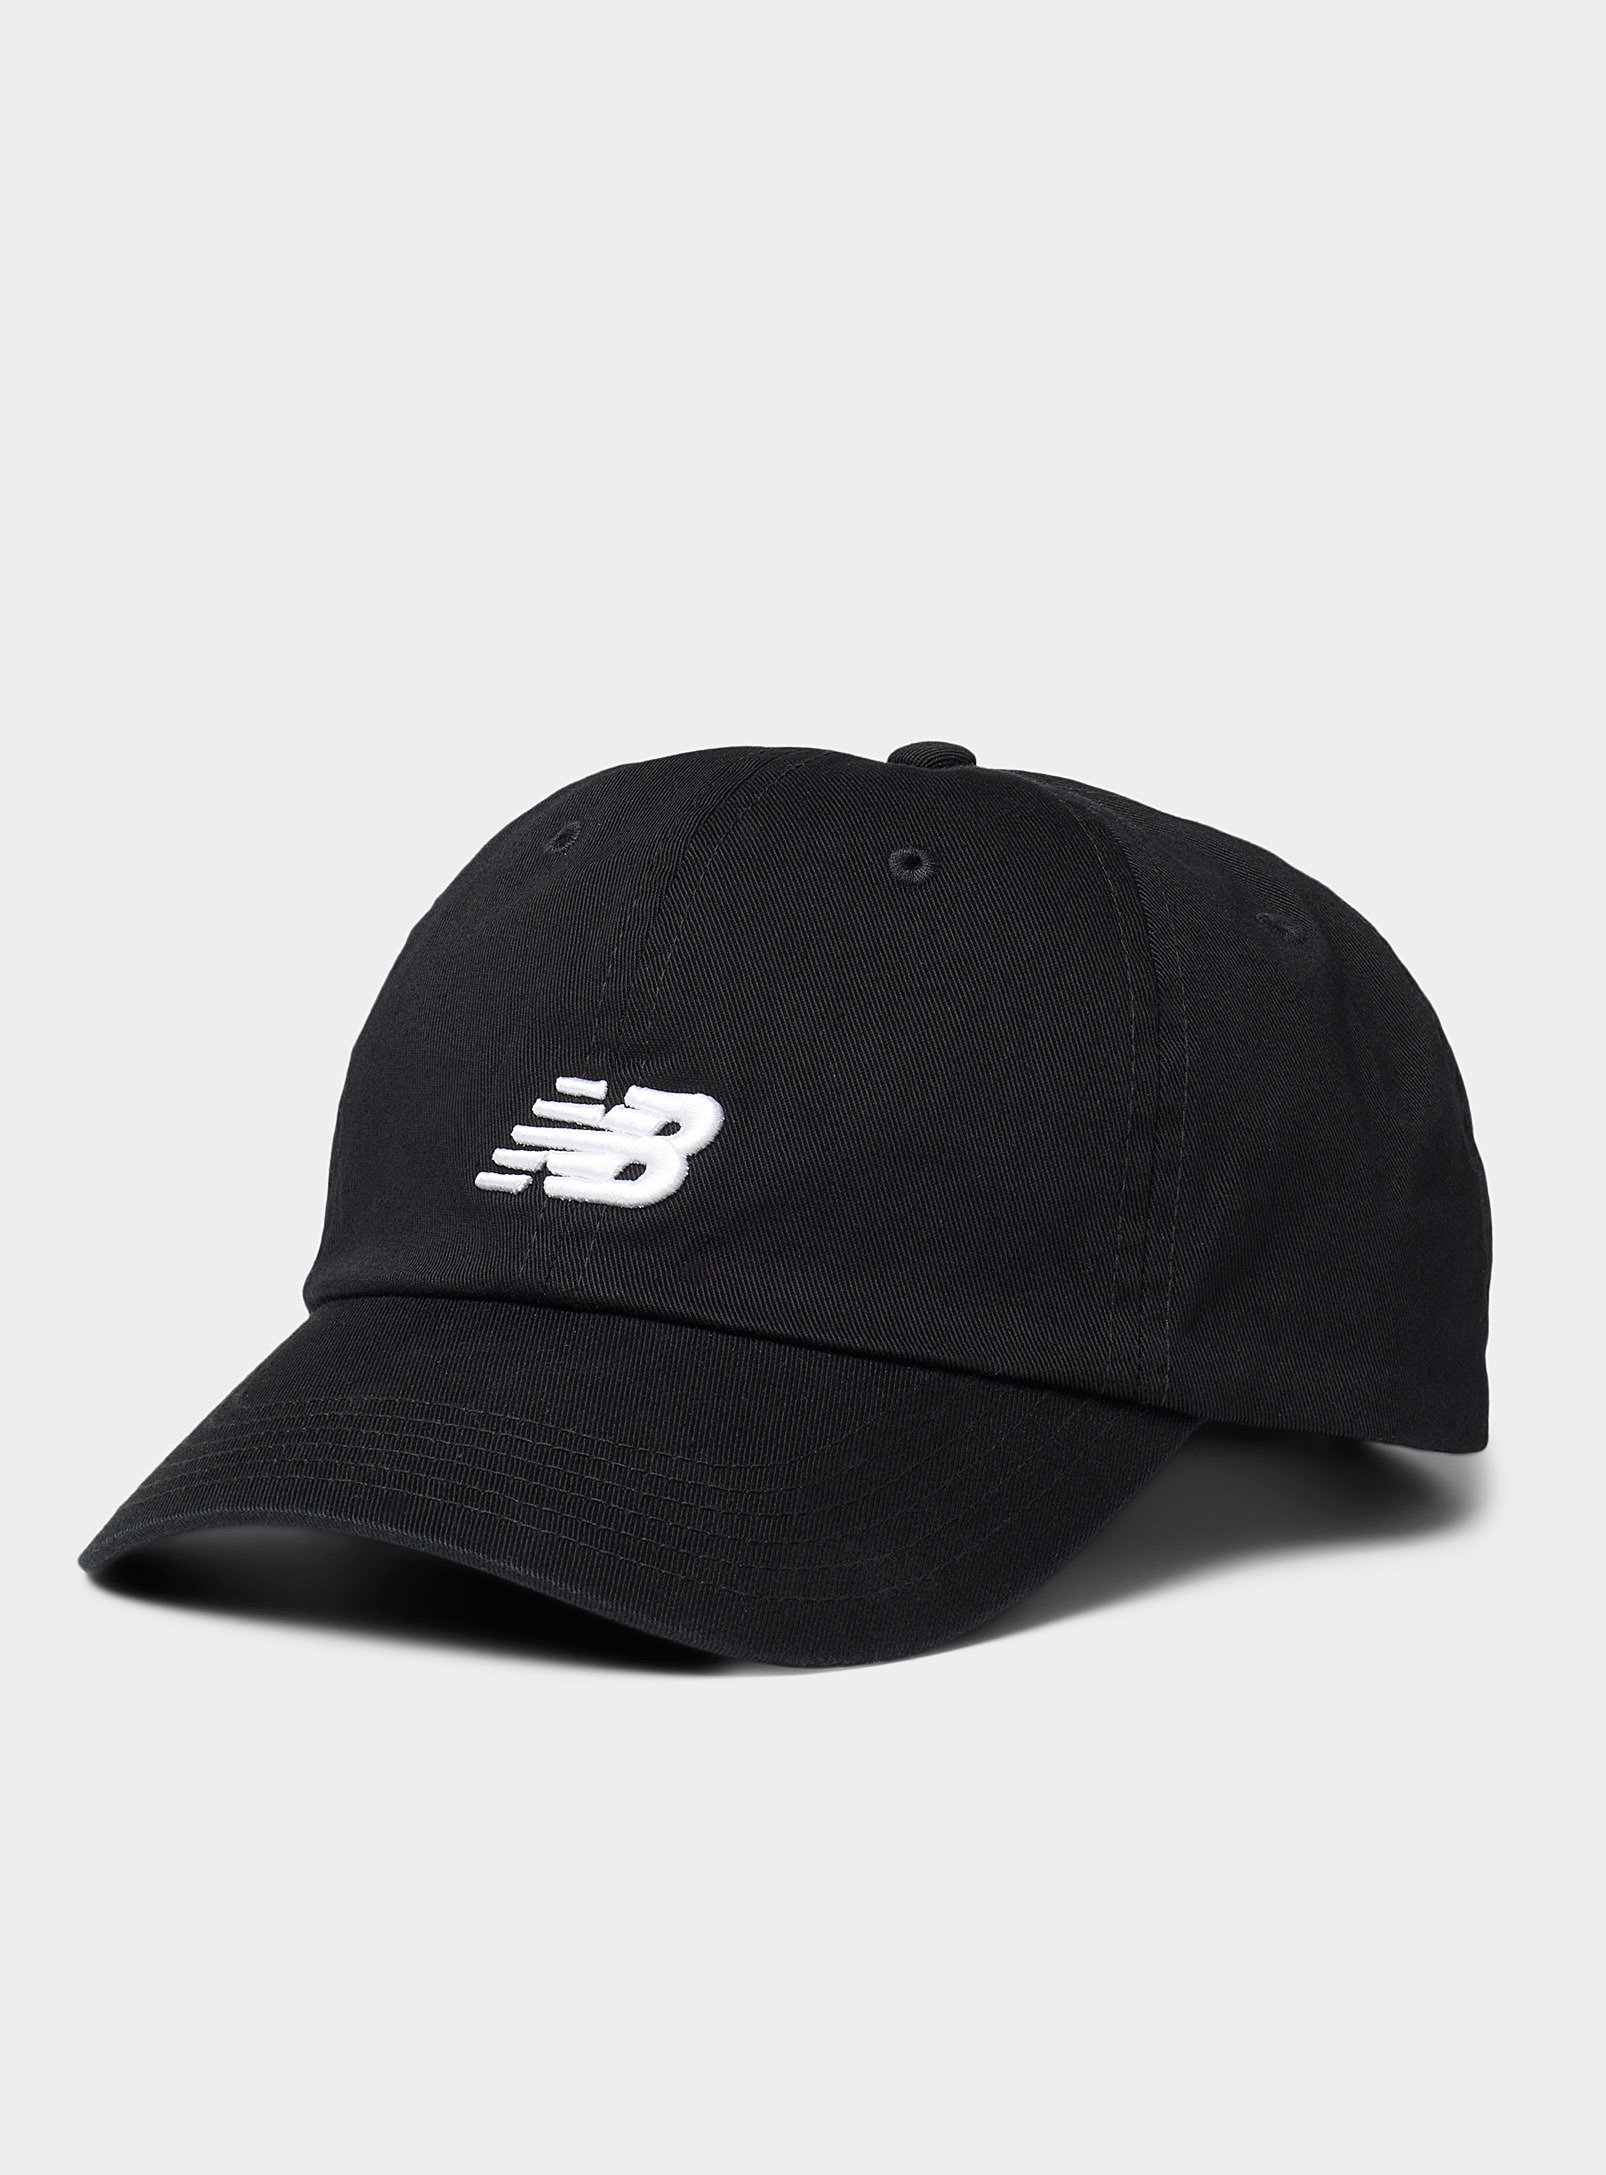 New Balance Embroidered Contrast Logo Baseball Cap In Black